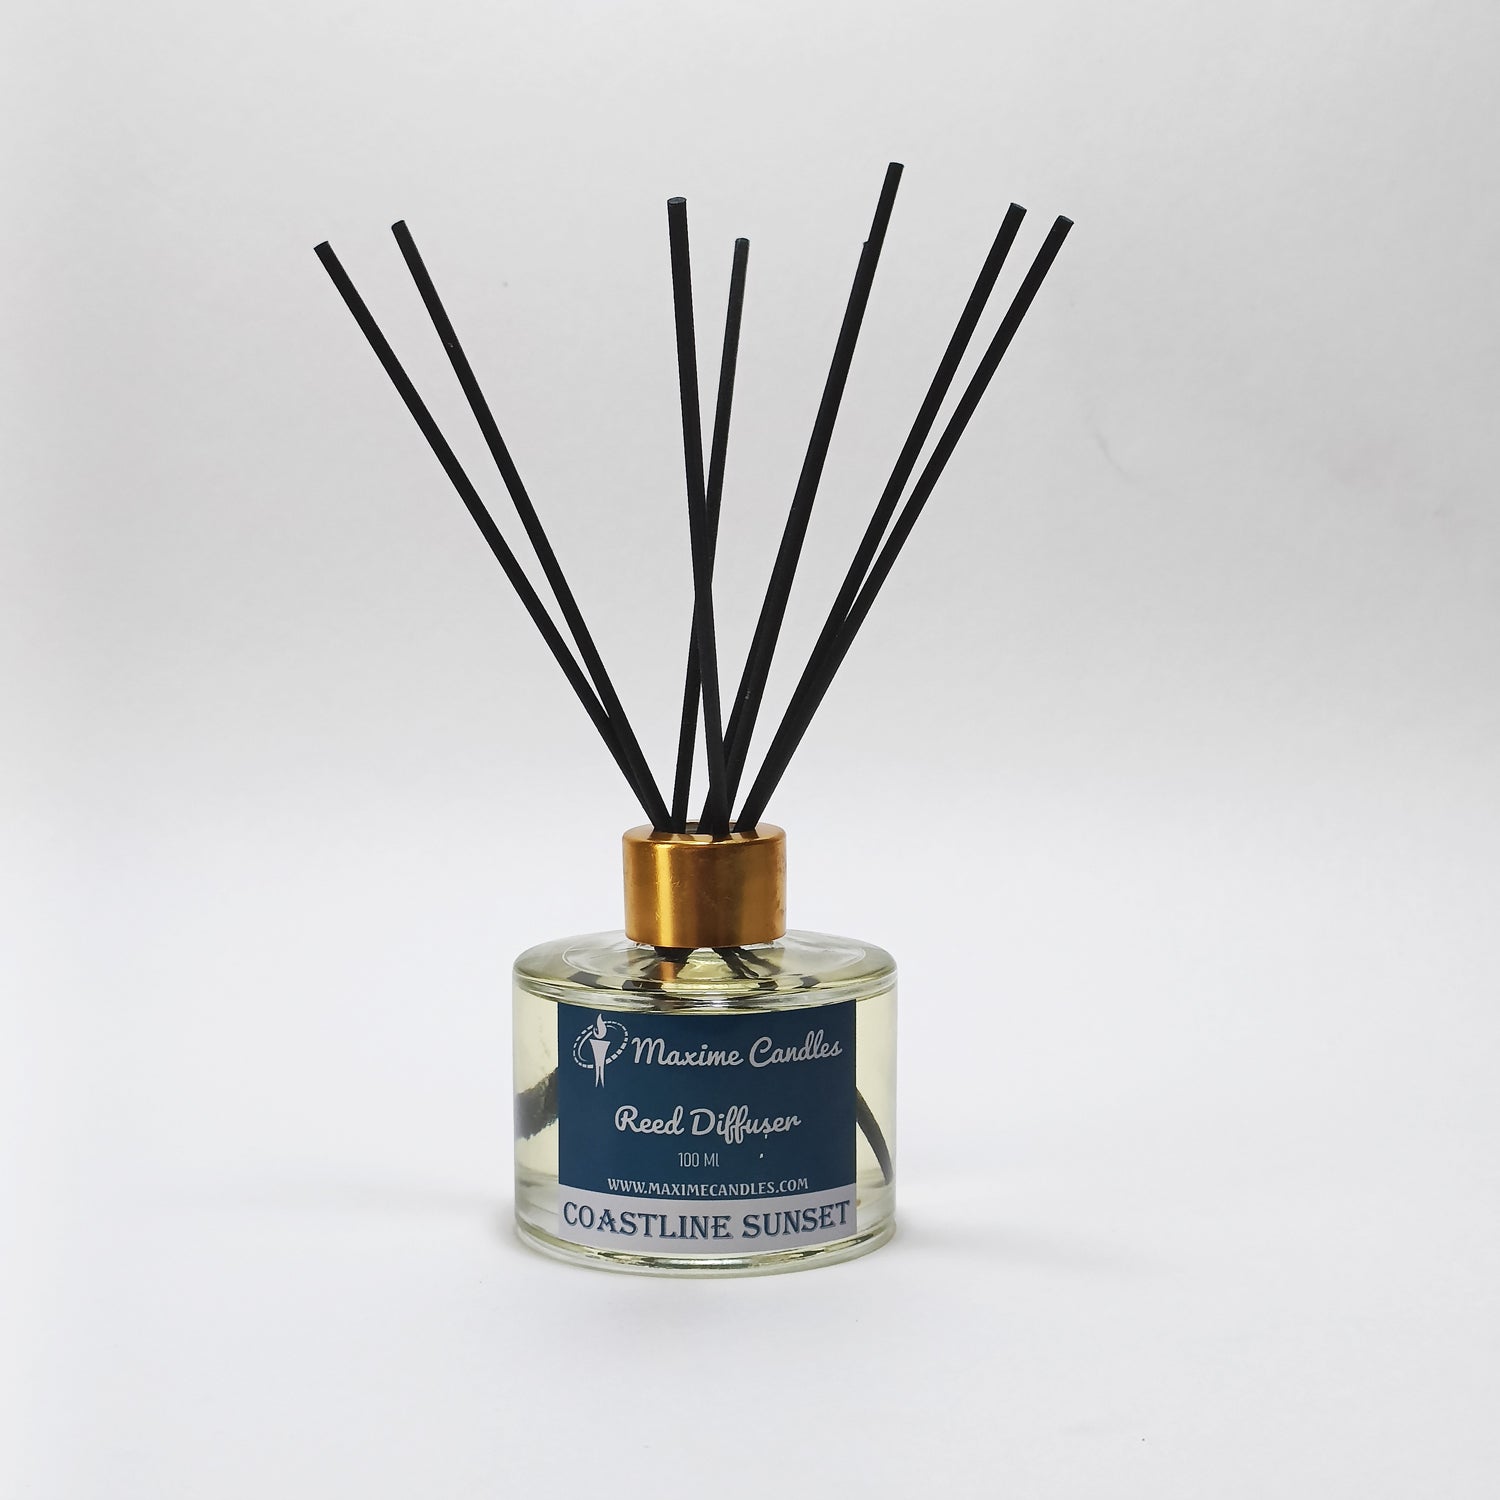 Maxime Candles Reed Diffuser with Black Fiber Sticks